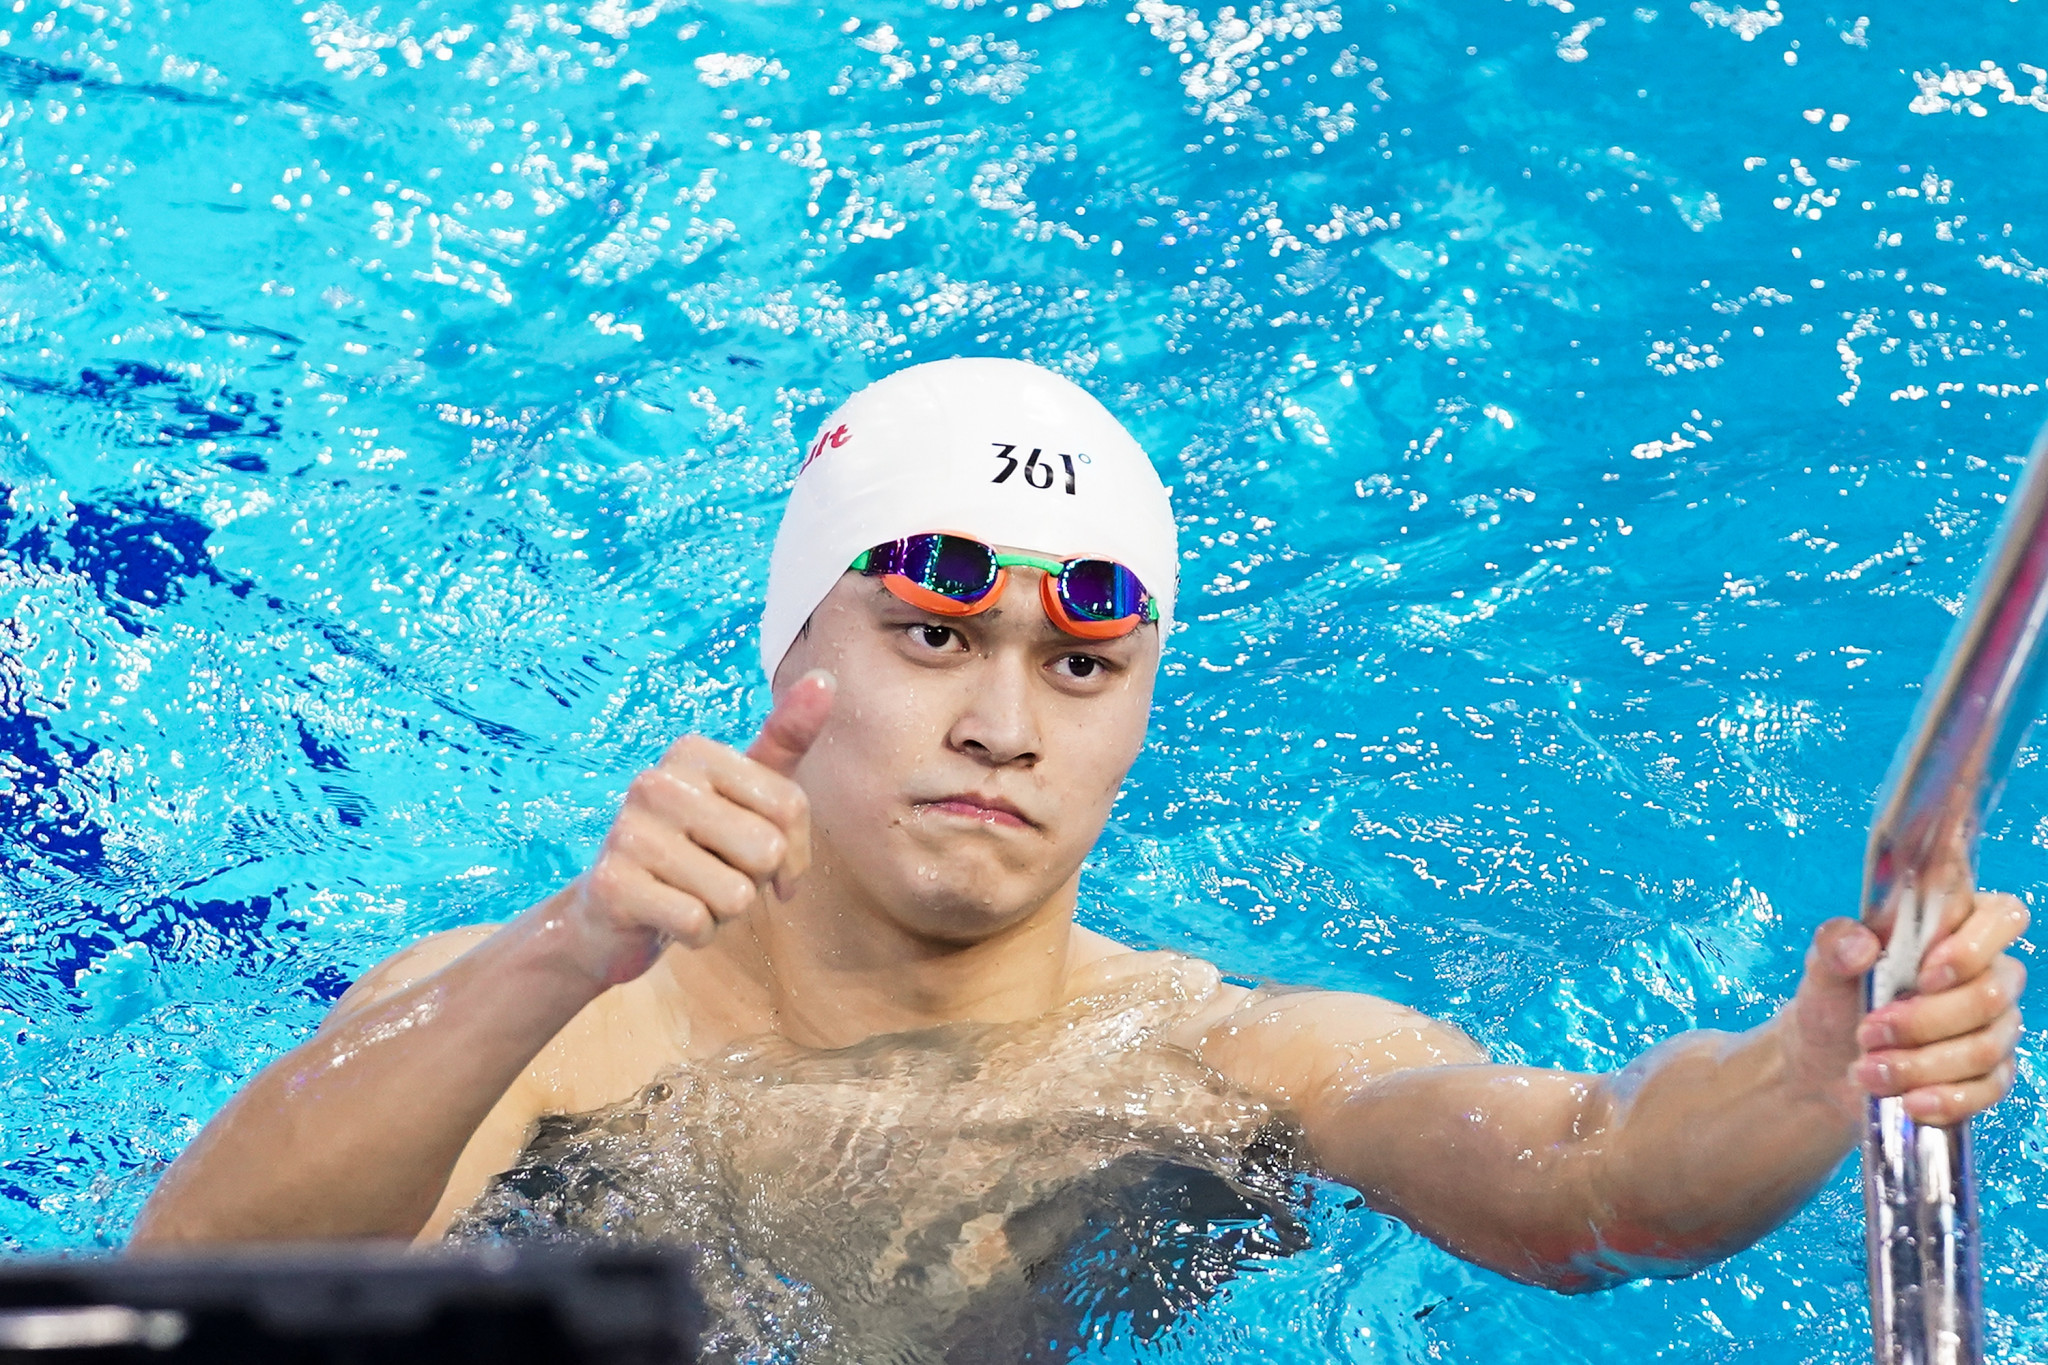 Controversial Chinese swimmer Sun Yang won two gold medals at the event in Guangzhou ©Getty Images